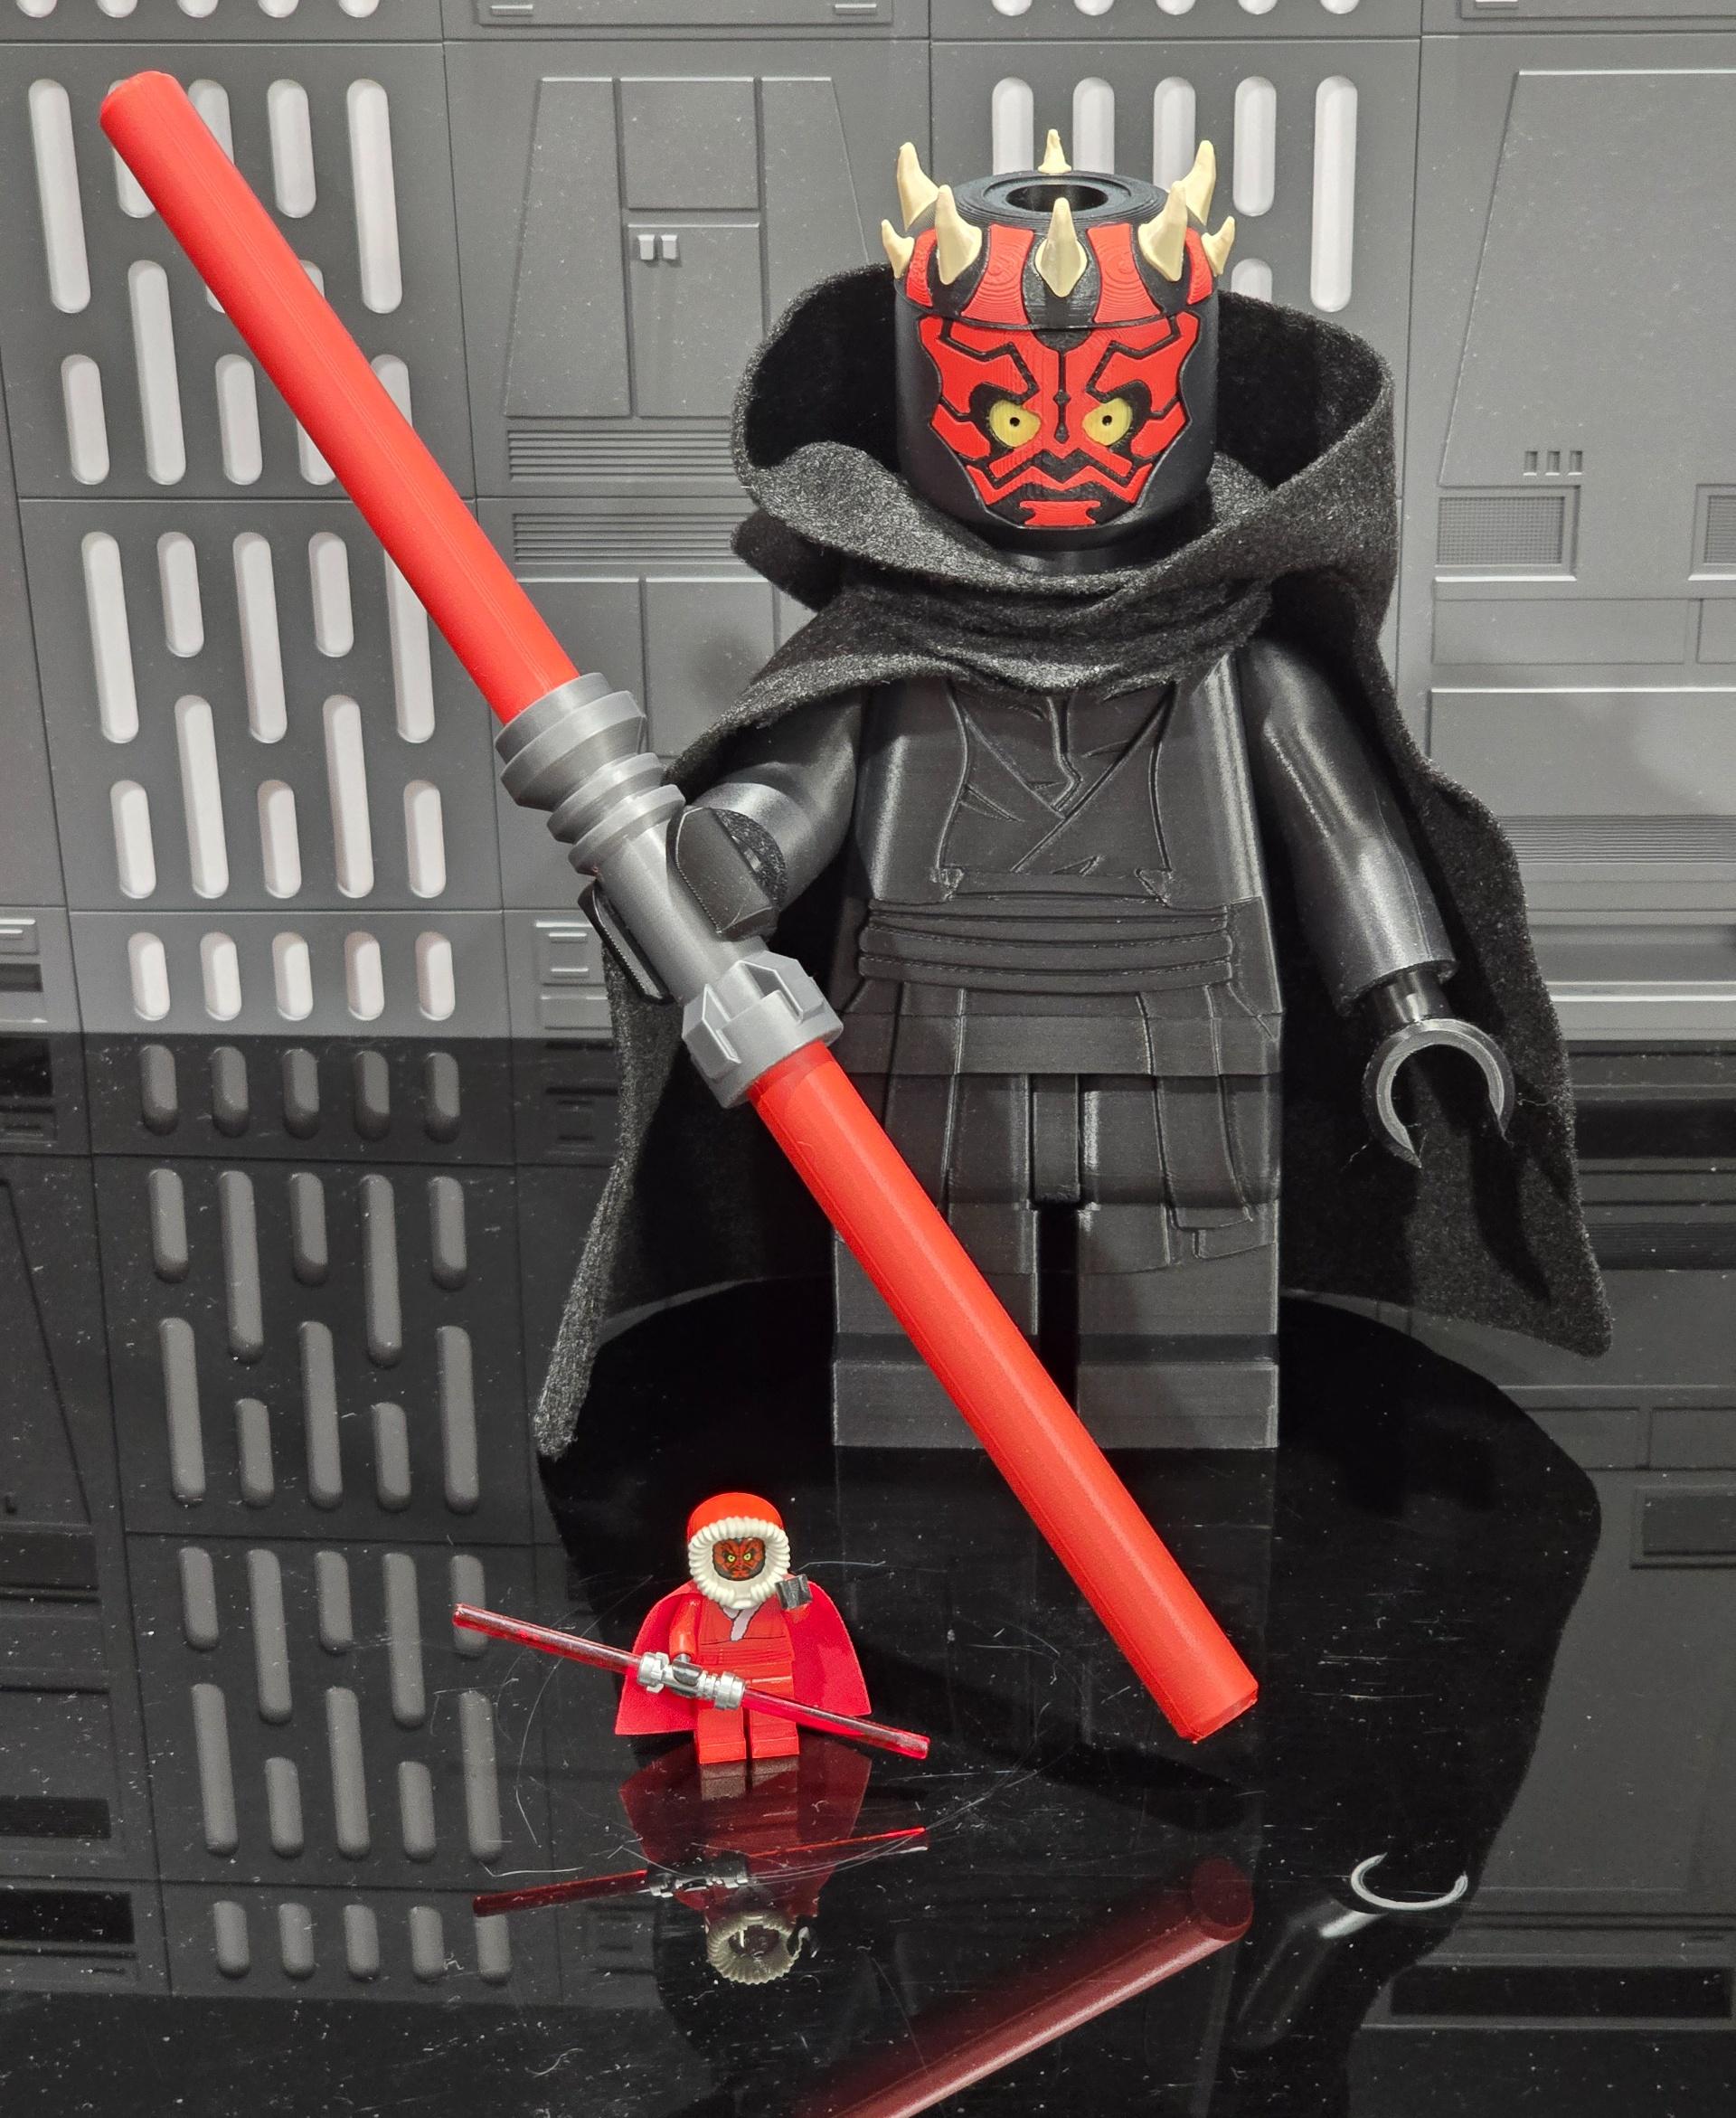 Darth Maul (9 inch brick figure, NO MMU/AMS, NO supports, NO glue) - "At last, we will print ourselves to the Jedi. At last, we will have brickvenge." - 3d model